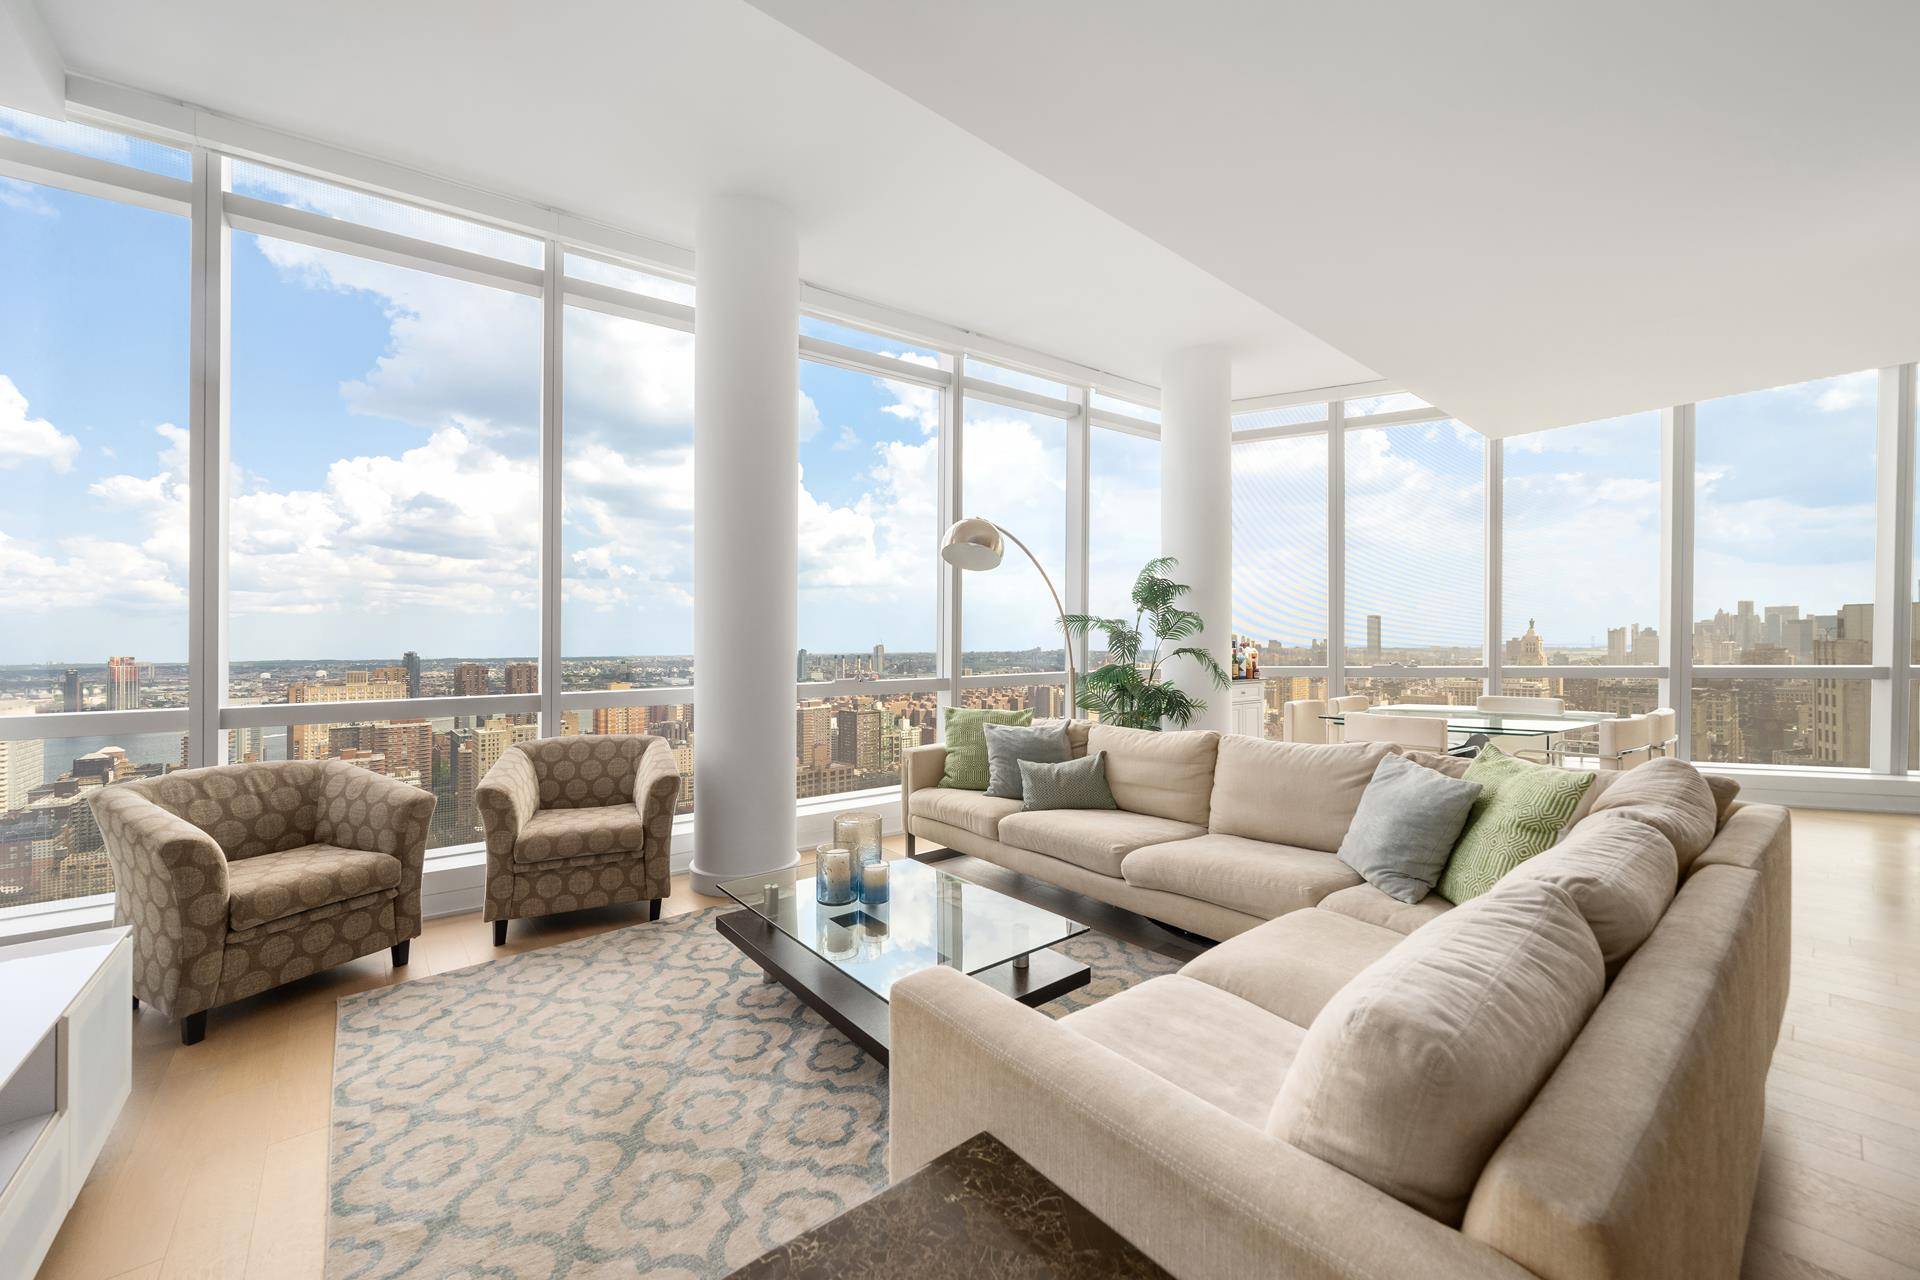 Perched atop the 39th floor of 400 Park Avenue South, Penthouse 3 is a sprawling 2, 538 square feet and offers 3 bedrooms, 3.